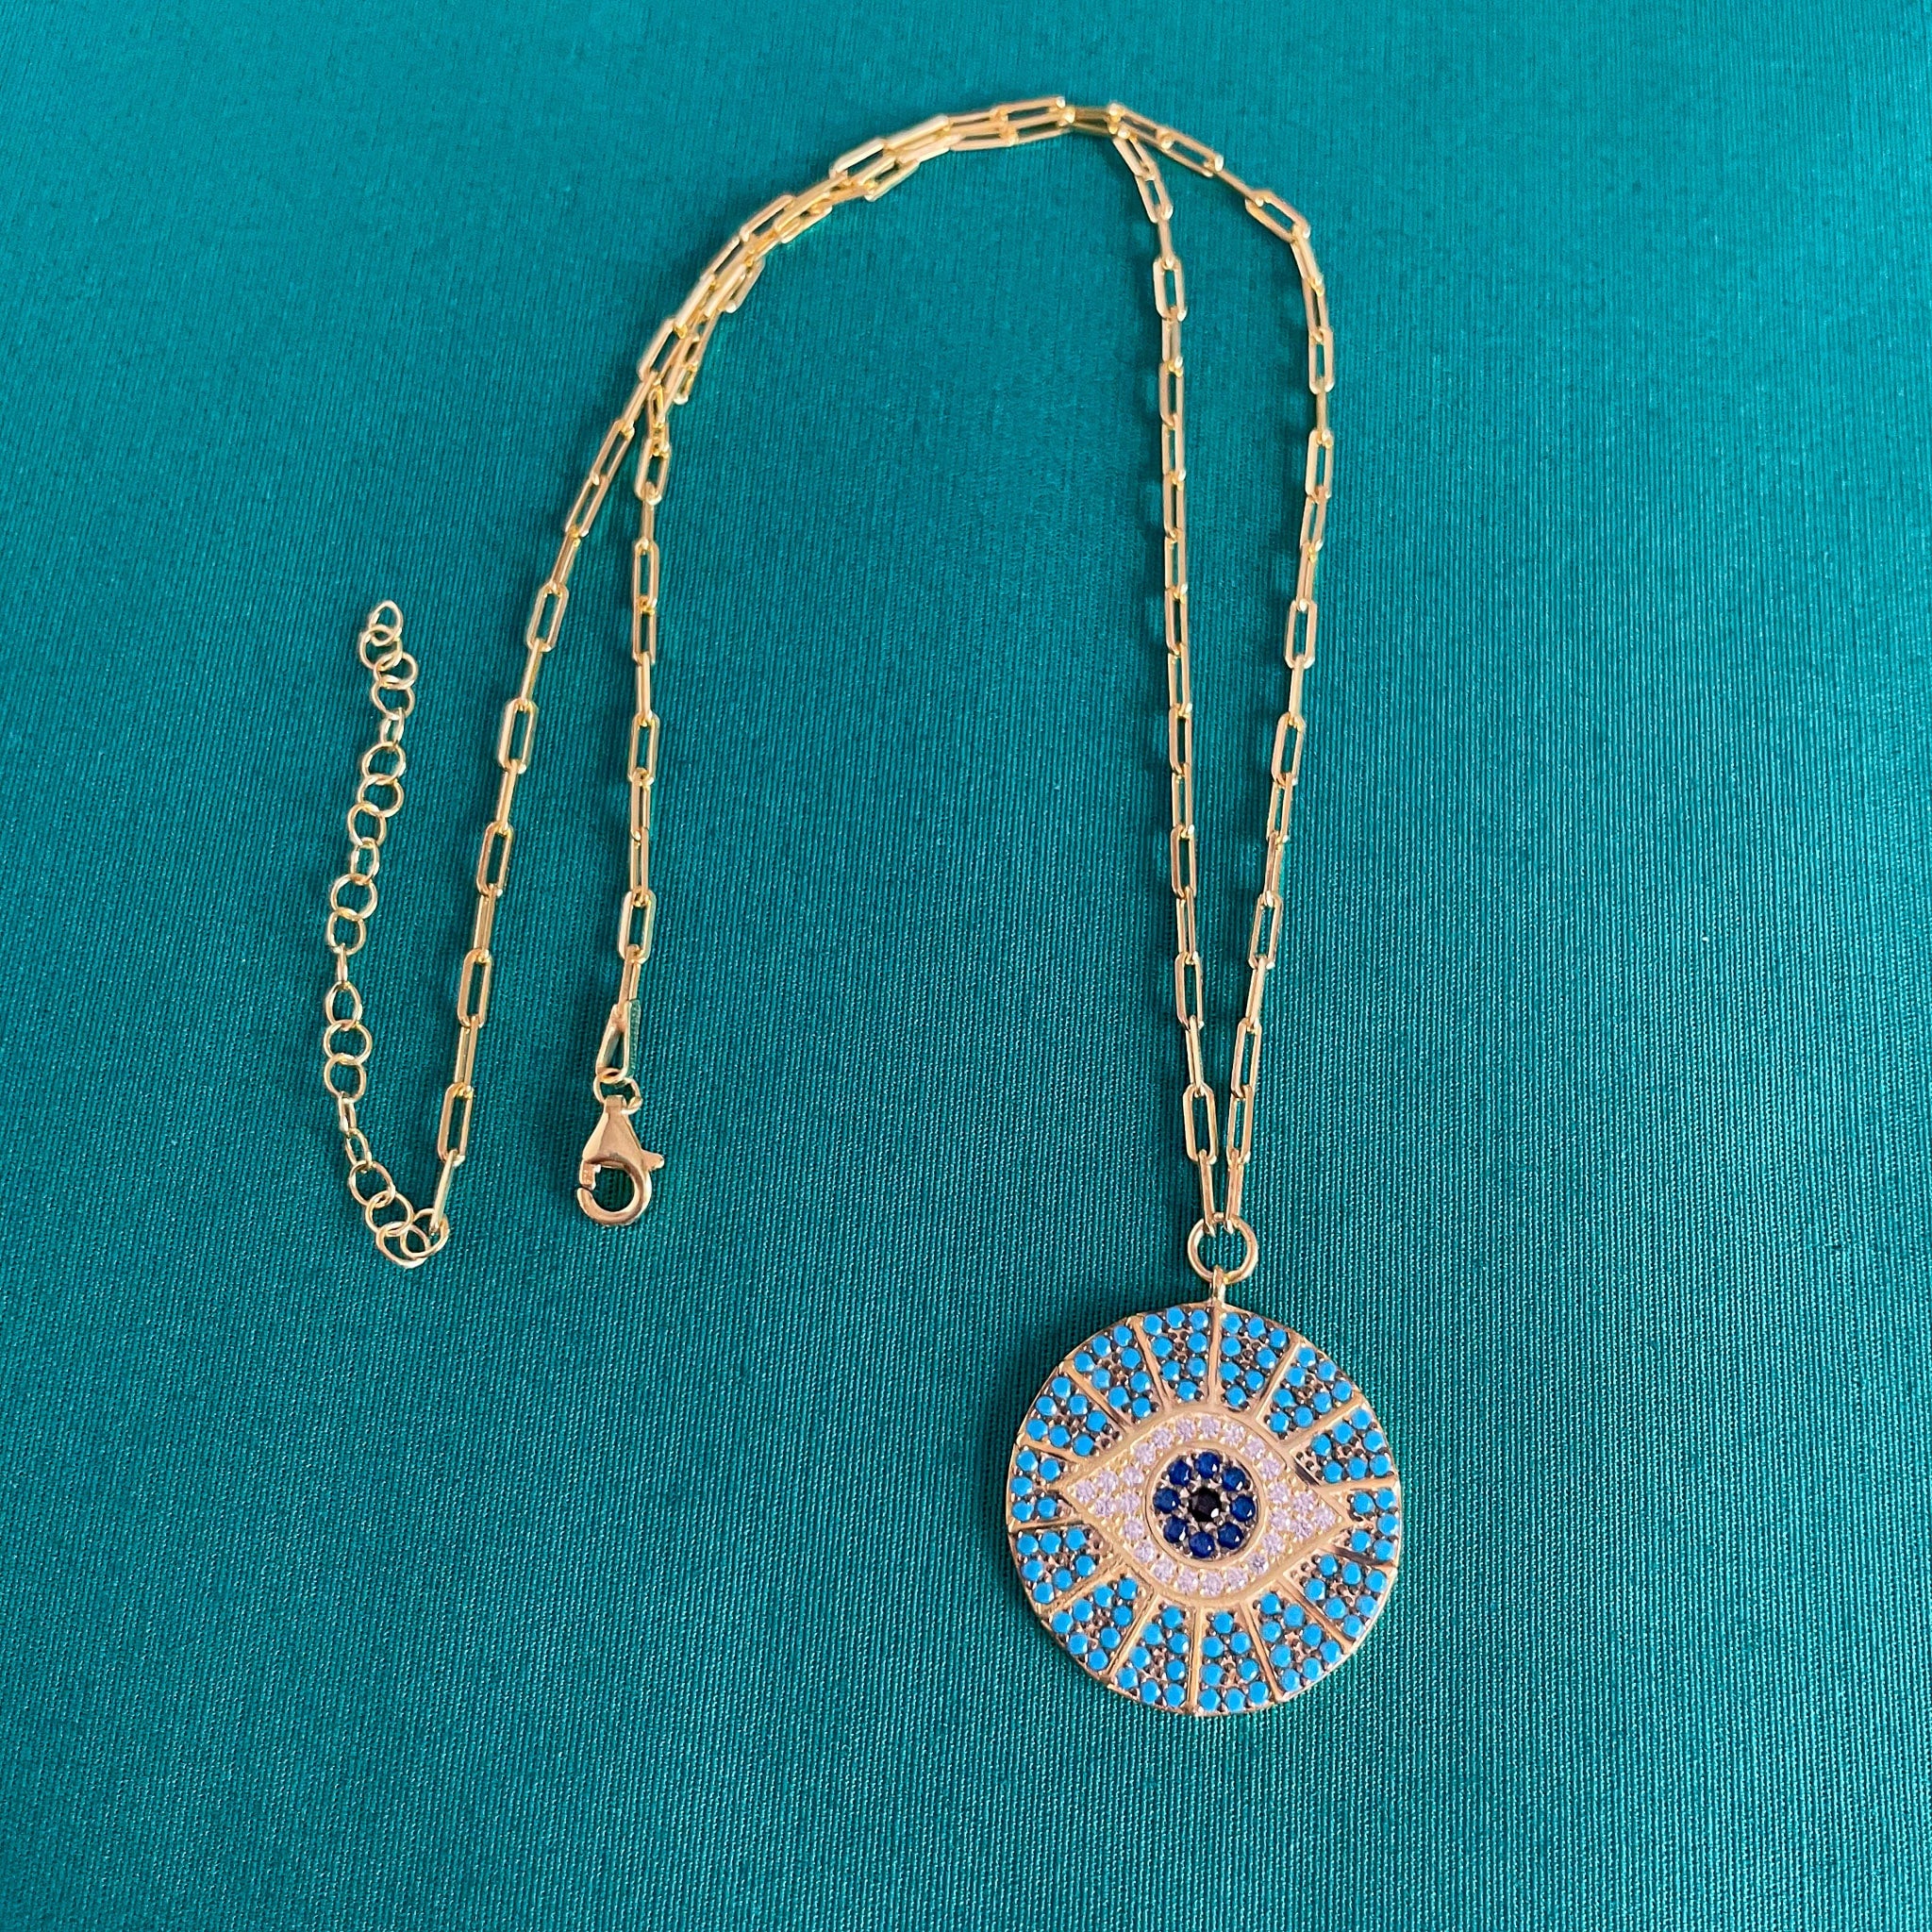 Turquoise Evil Eye Link Necklace